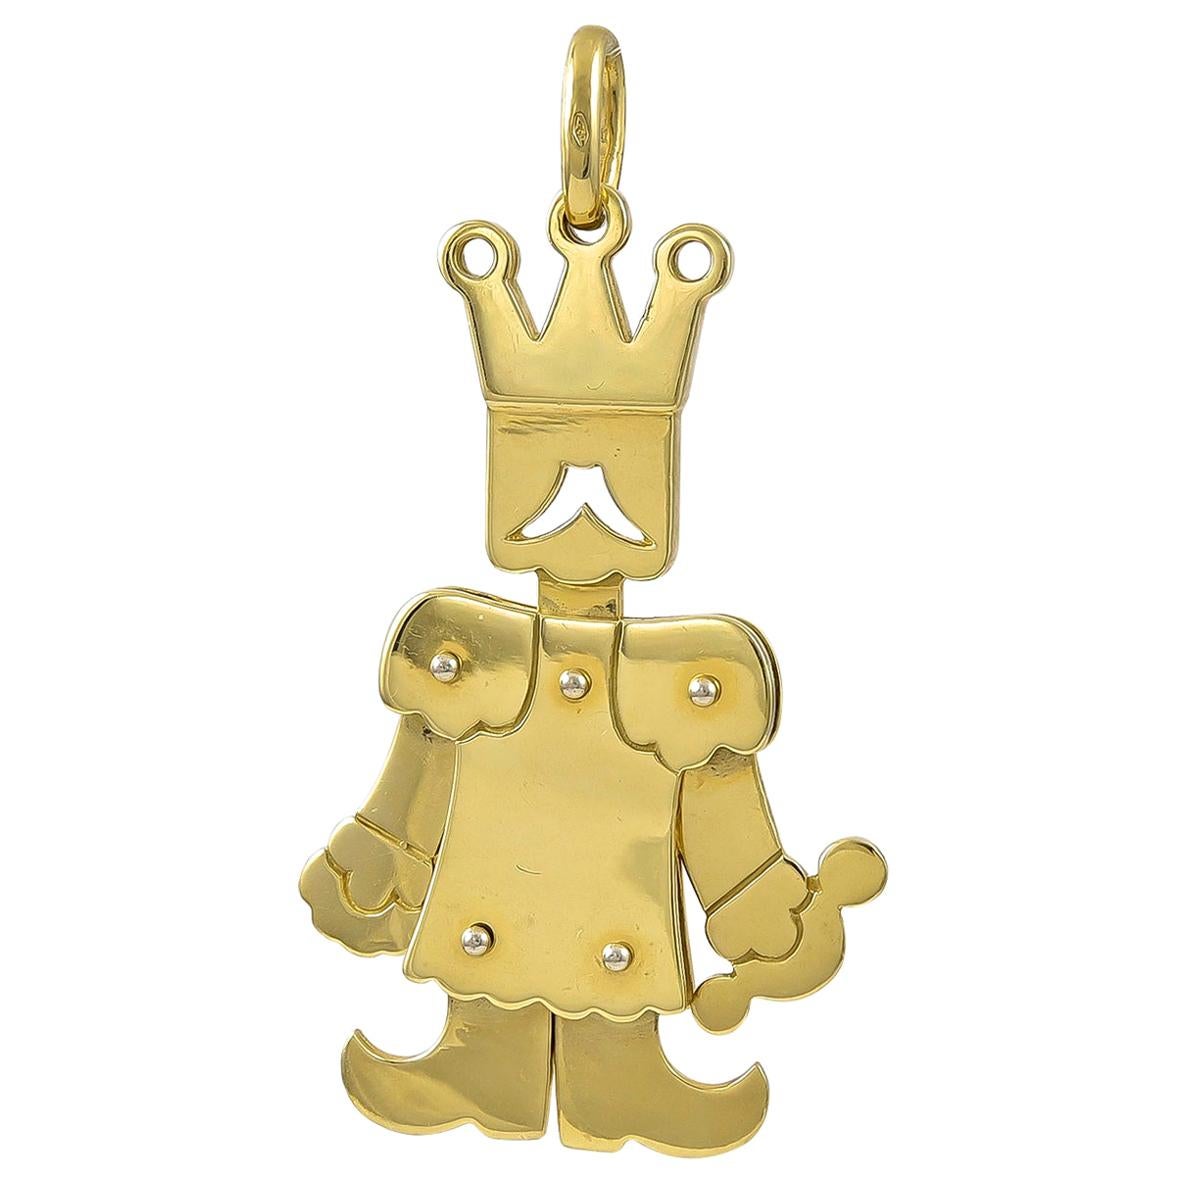 Articulated 18 Karat Gold King or Jester Pendant by Pomellato of Milan For Sale